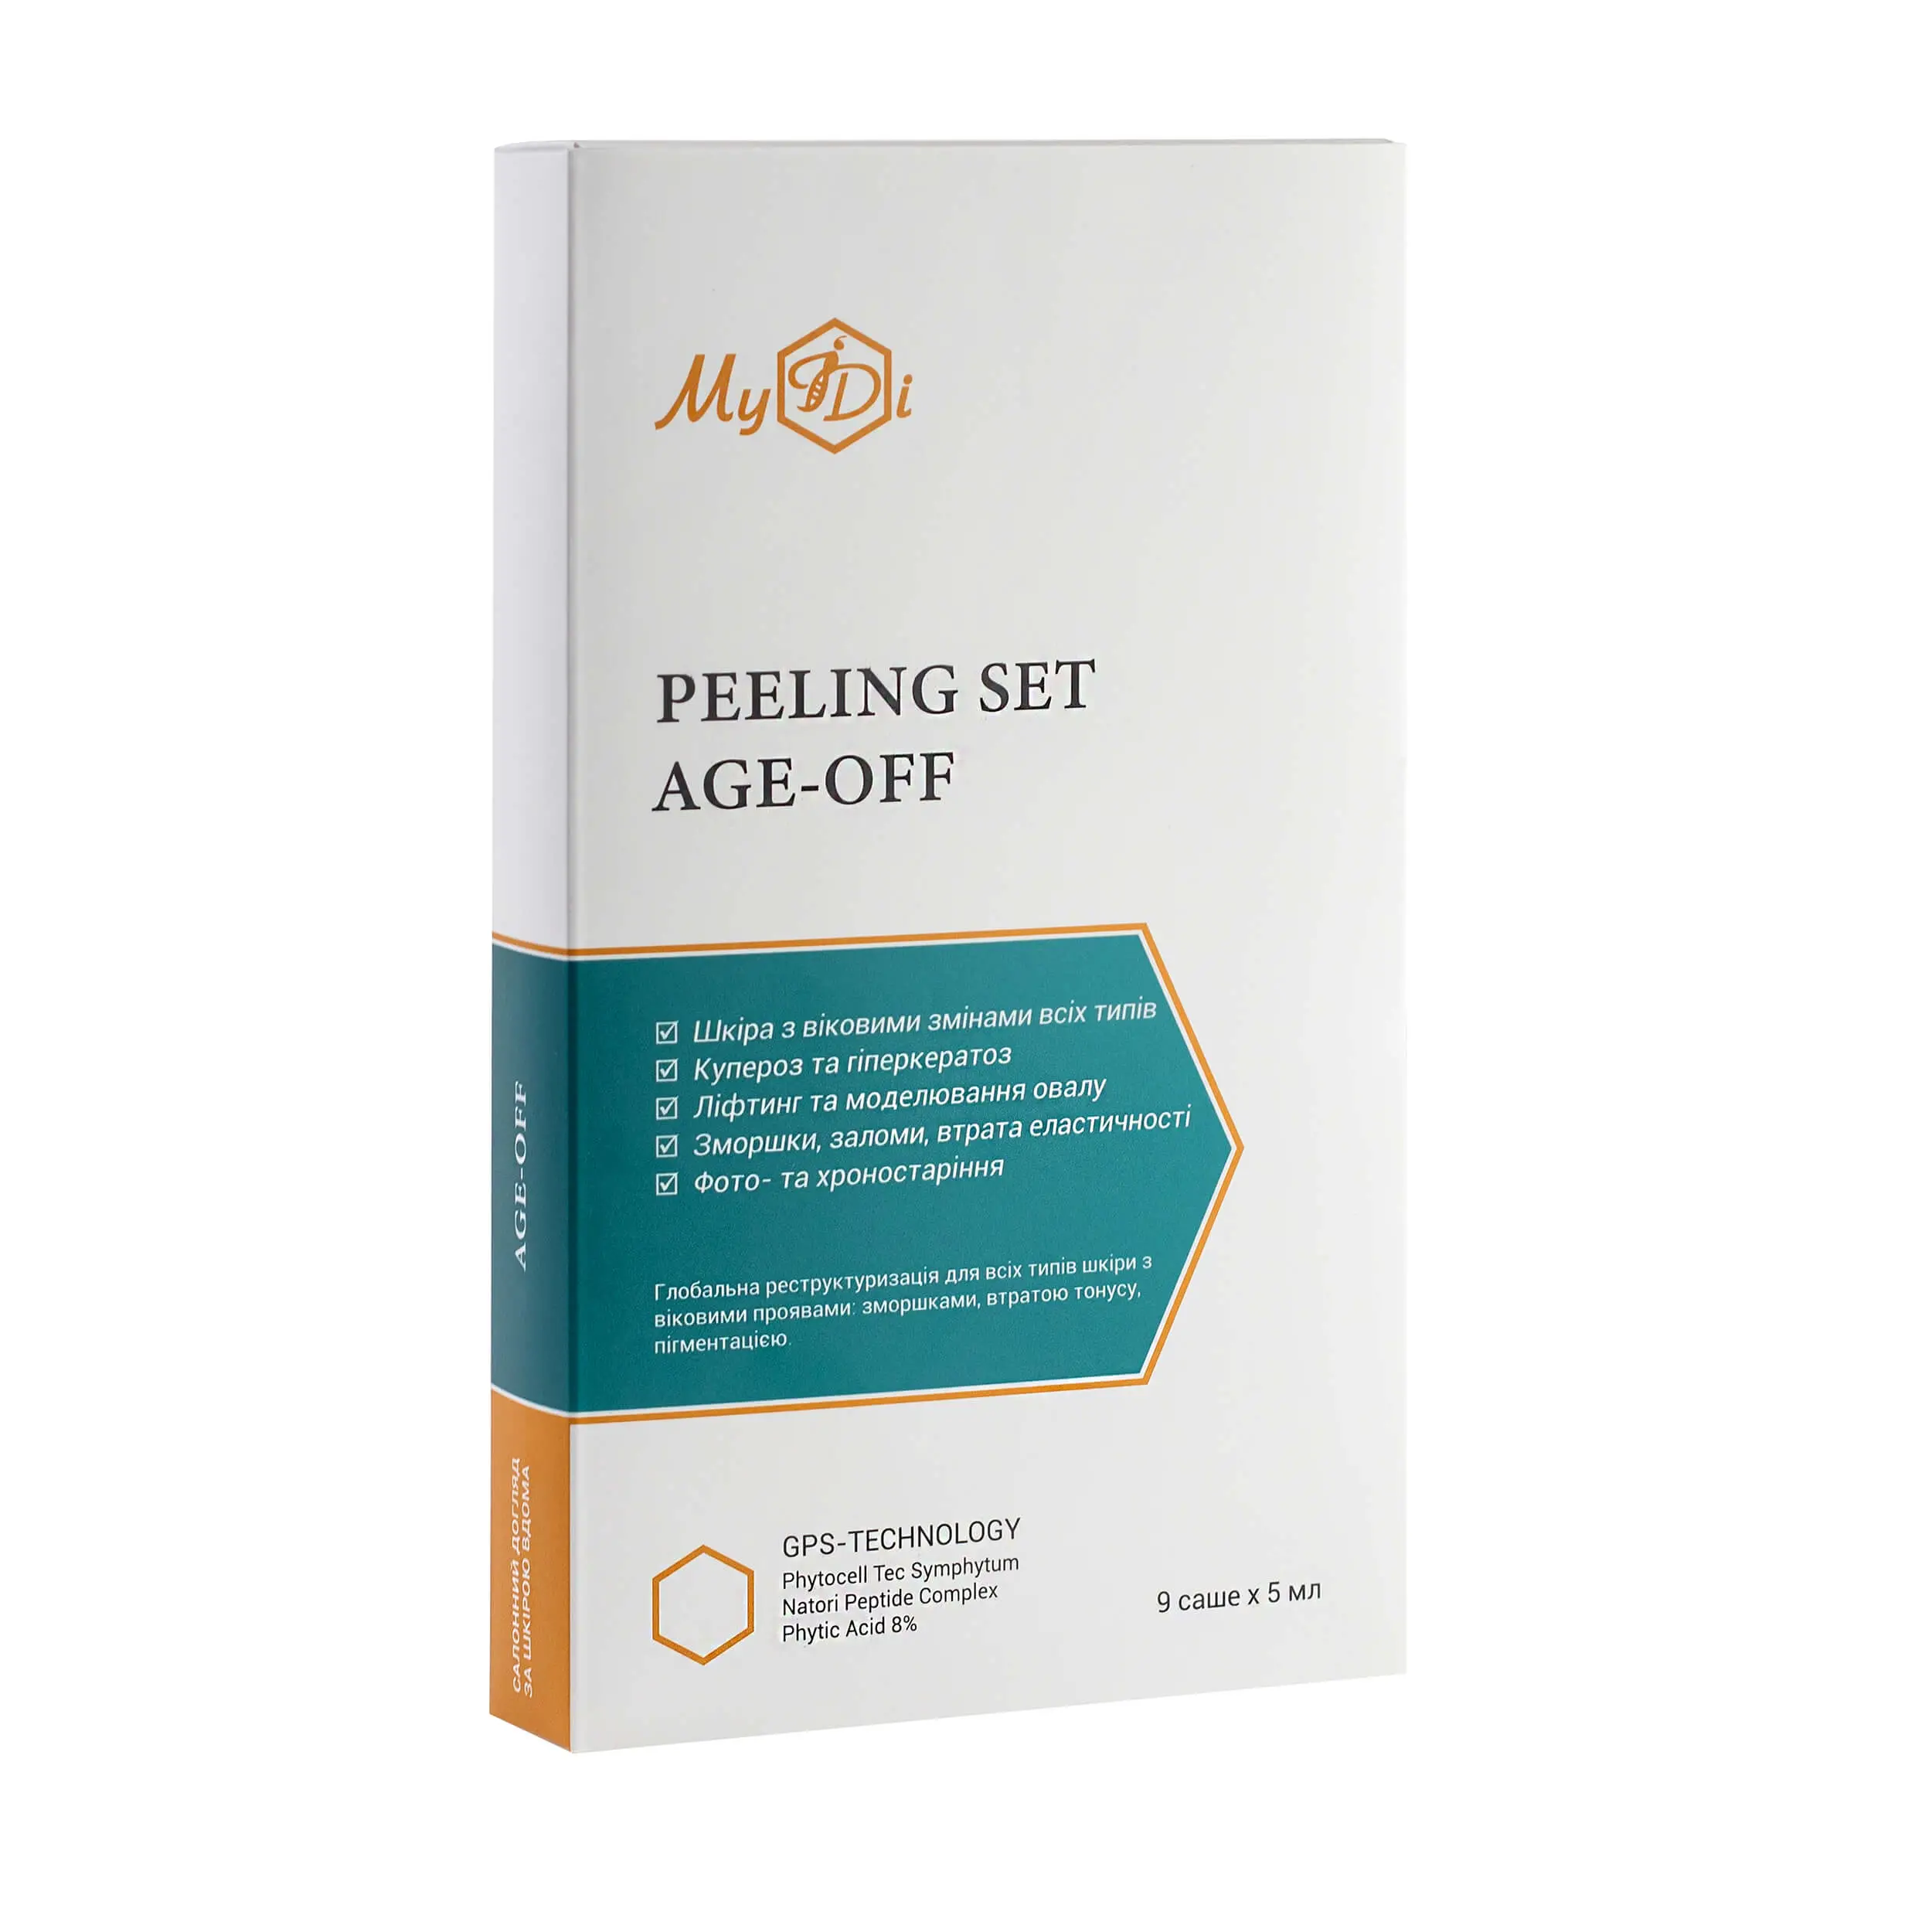 Anti-aging facial peeling set The power of peptides